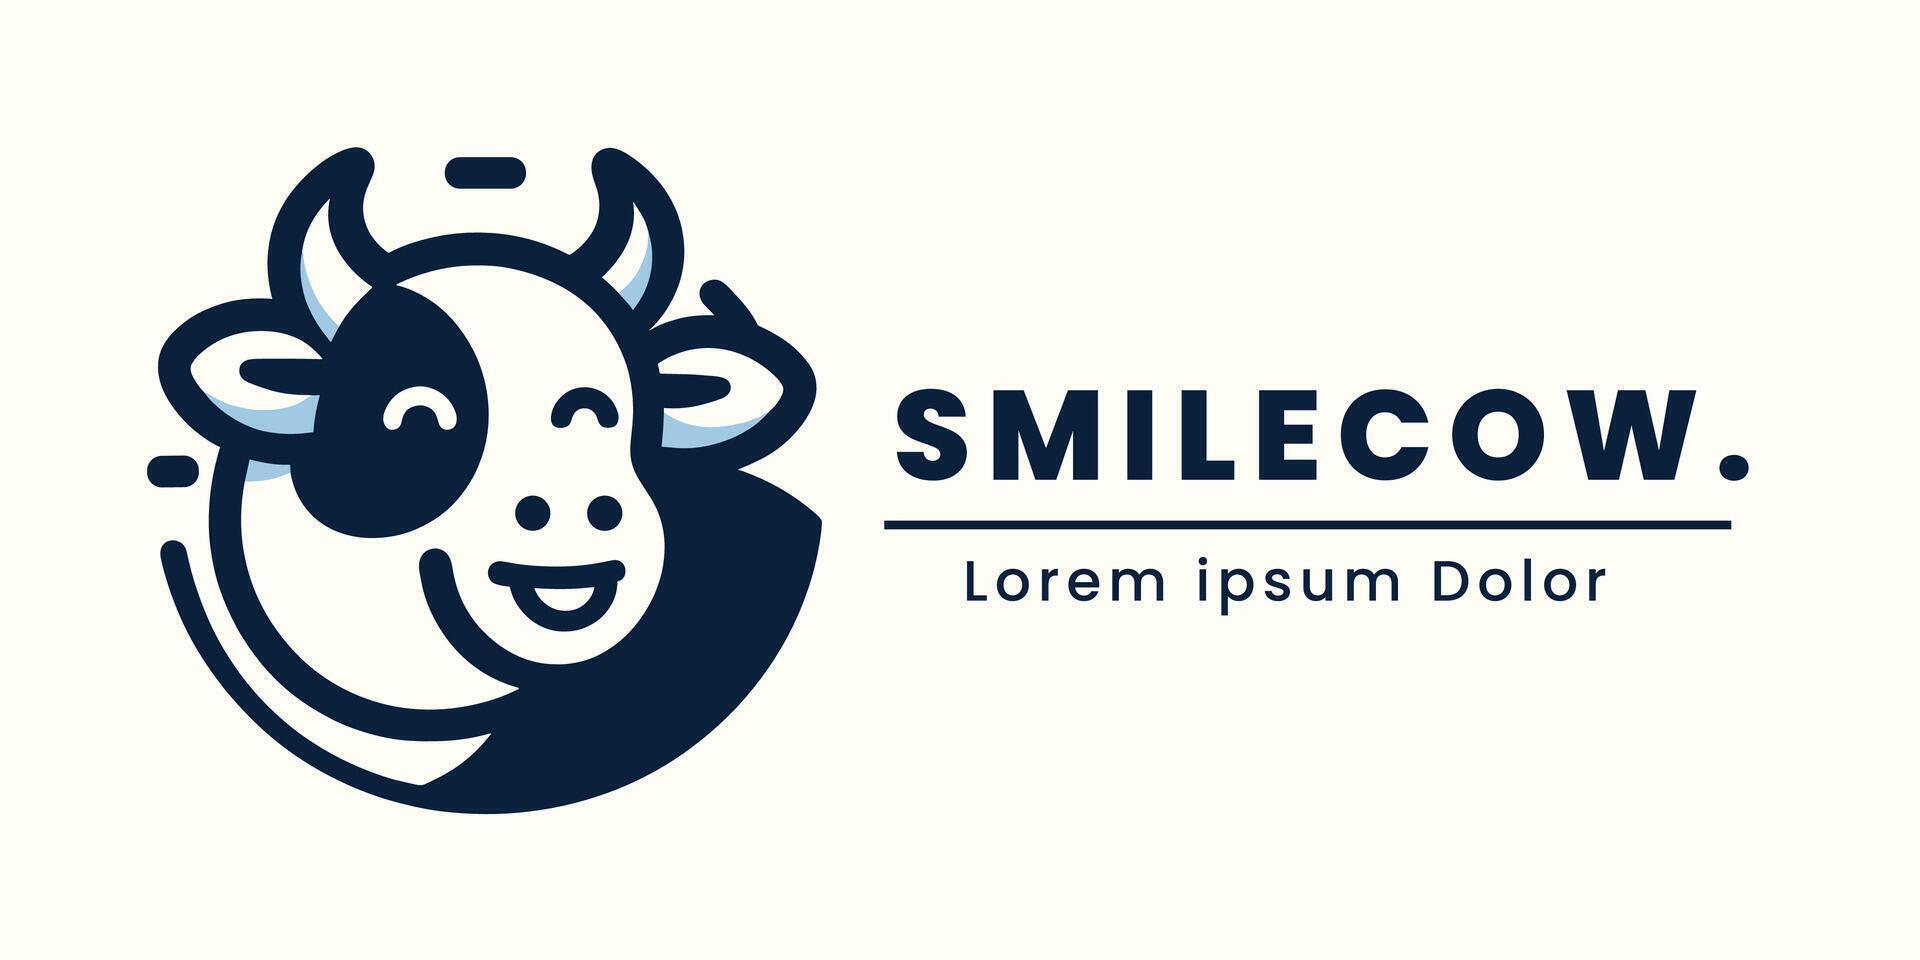 smiling cow logo in a modern style, simple and fun icon and emblem branding design vector